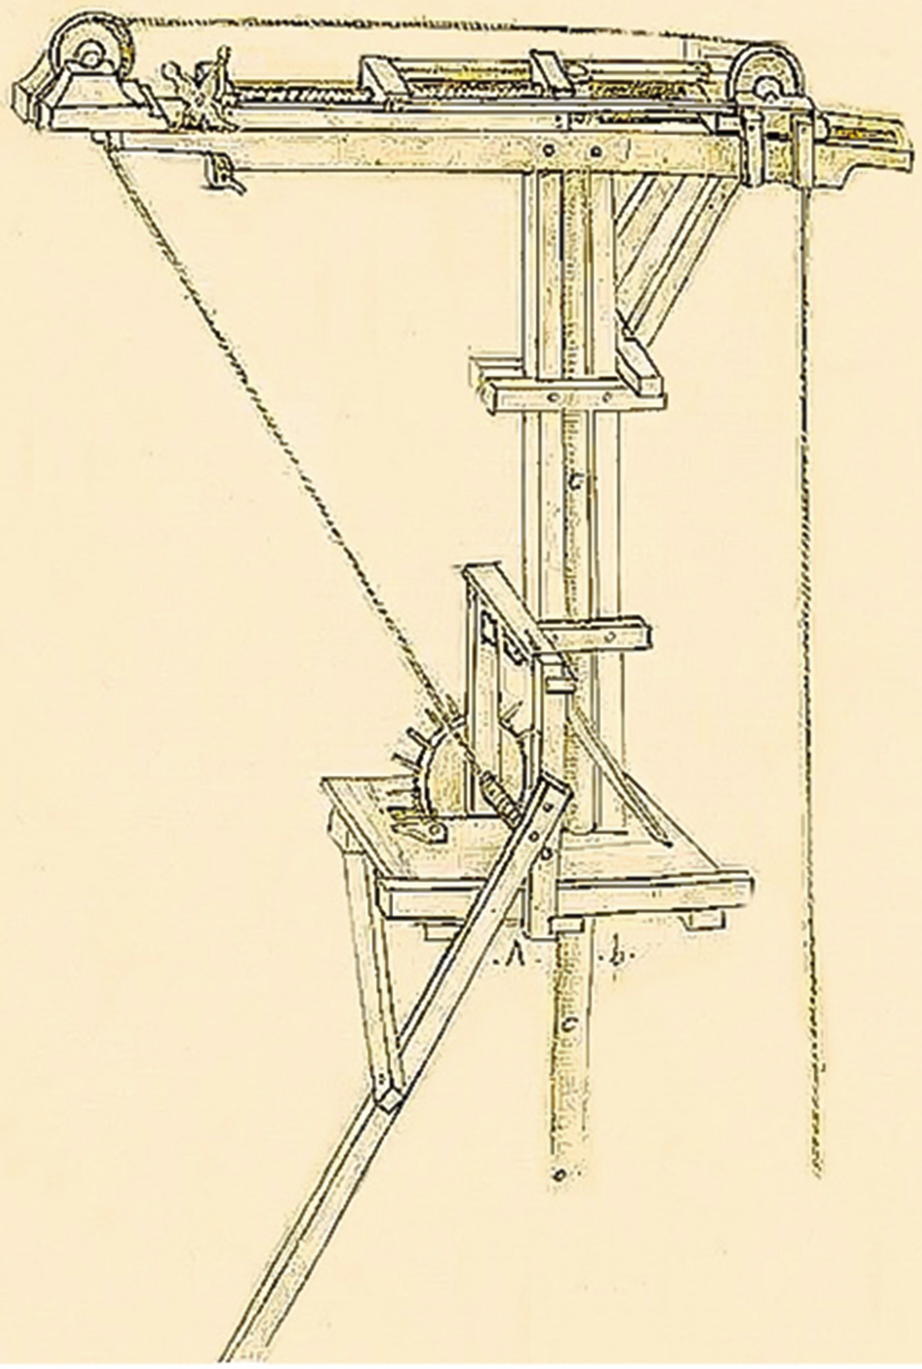 Brunelleschi's crane and hoist that were used to lift heavy objects during project construction.